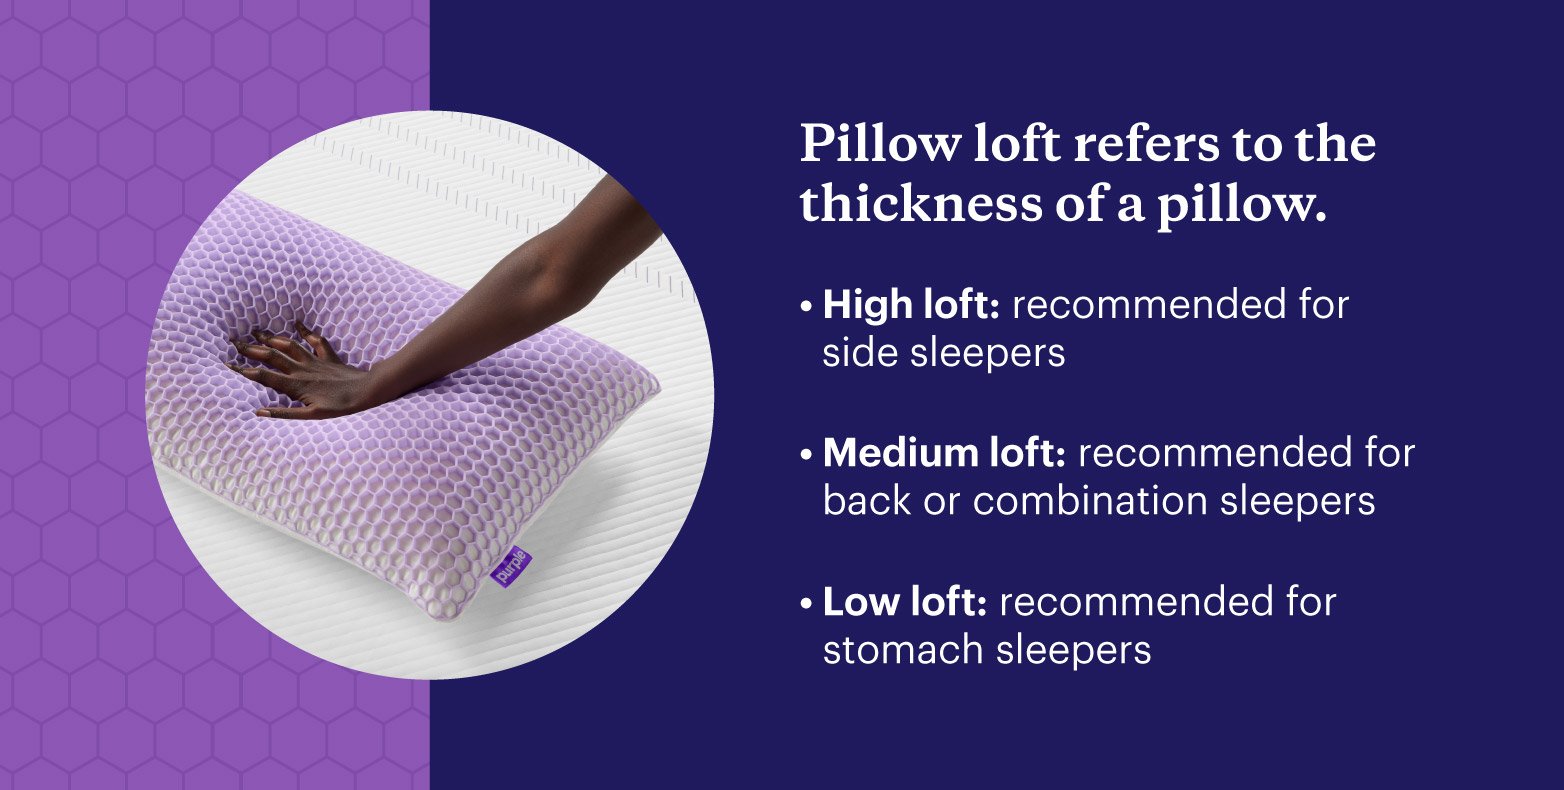 A Purple Harmony Pillow aside the definition of pillow loft and what lofts are best for which sleeping position.